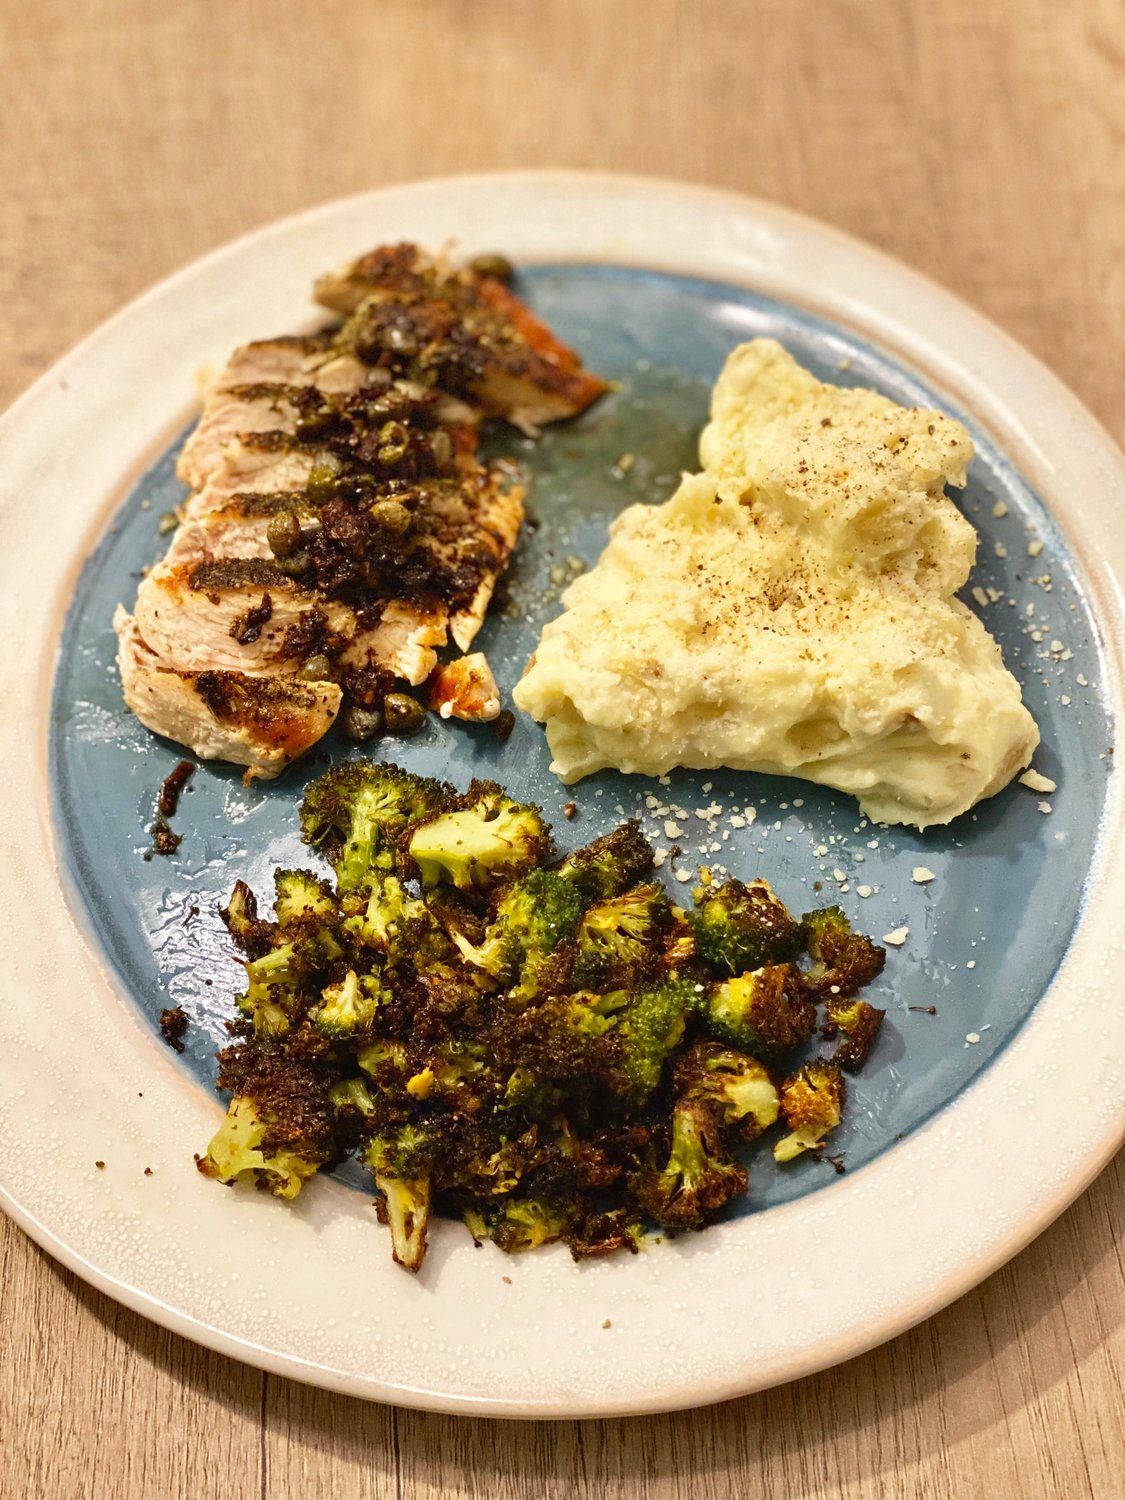 This lemon caper chicken recipe is a constant favorite that we both love making, and something that I’d love to share with you all.